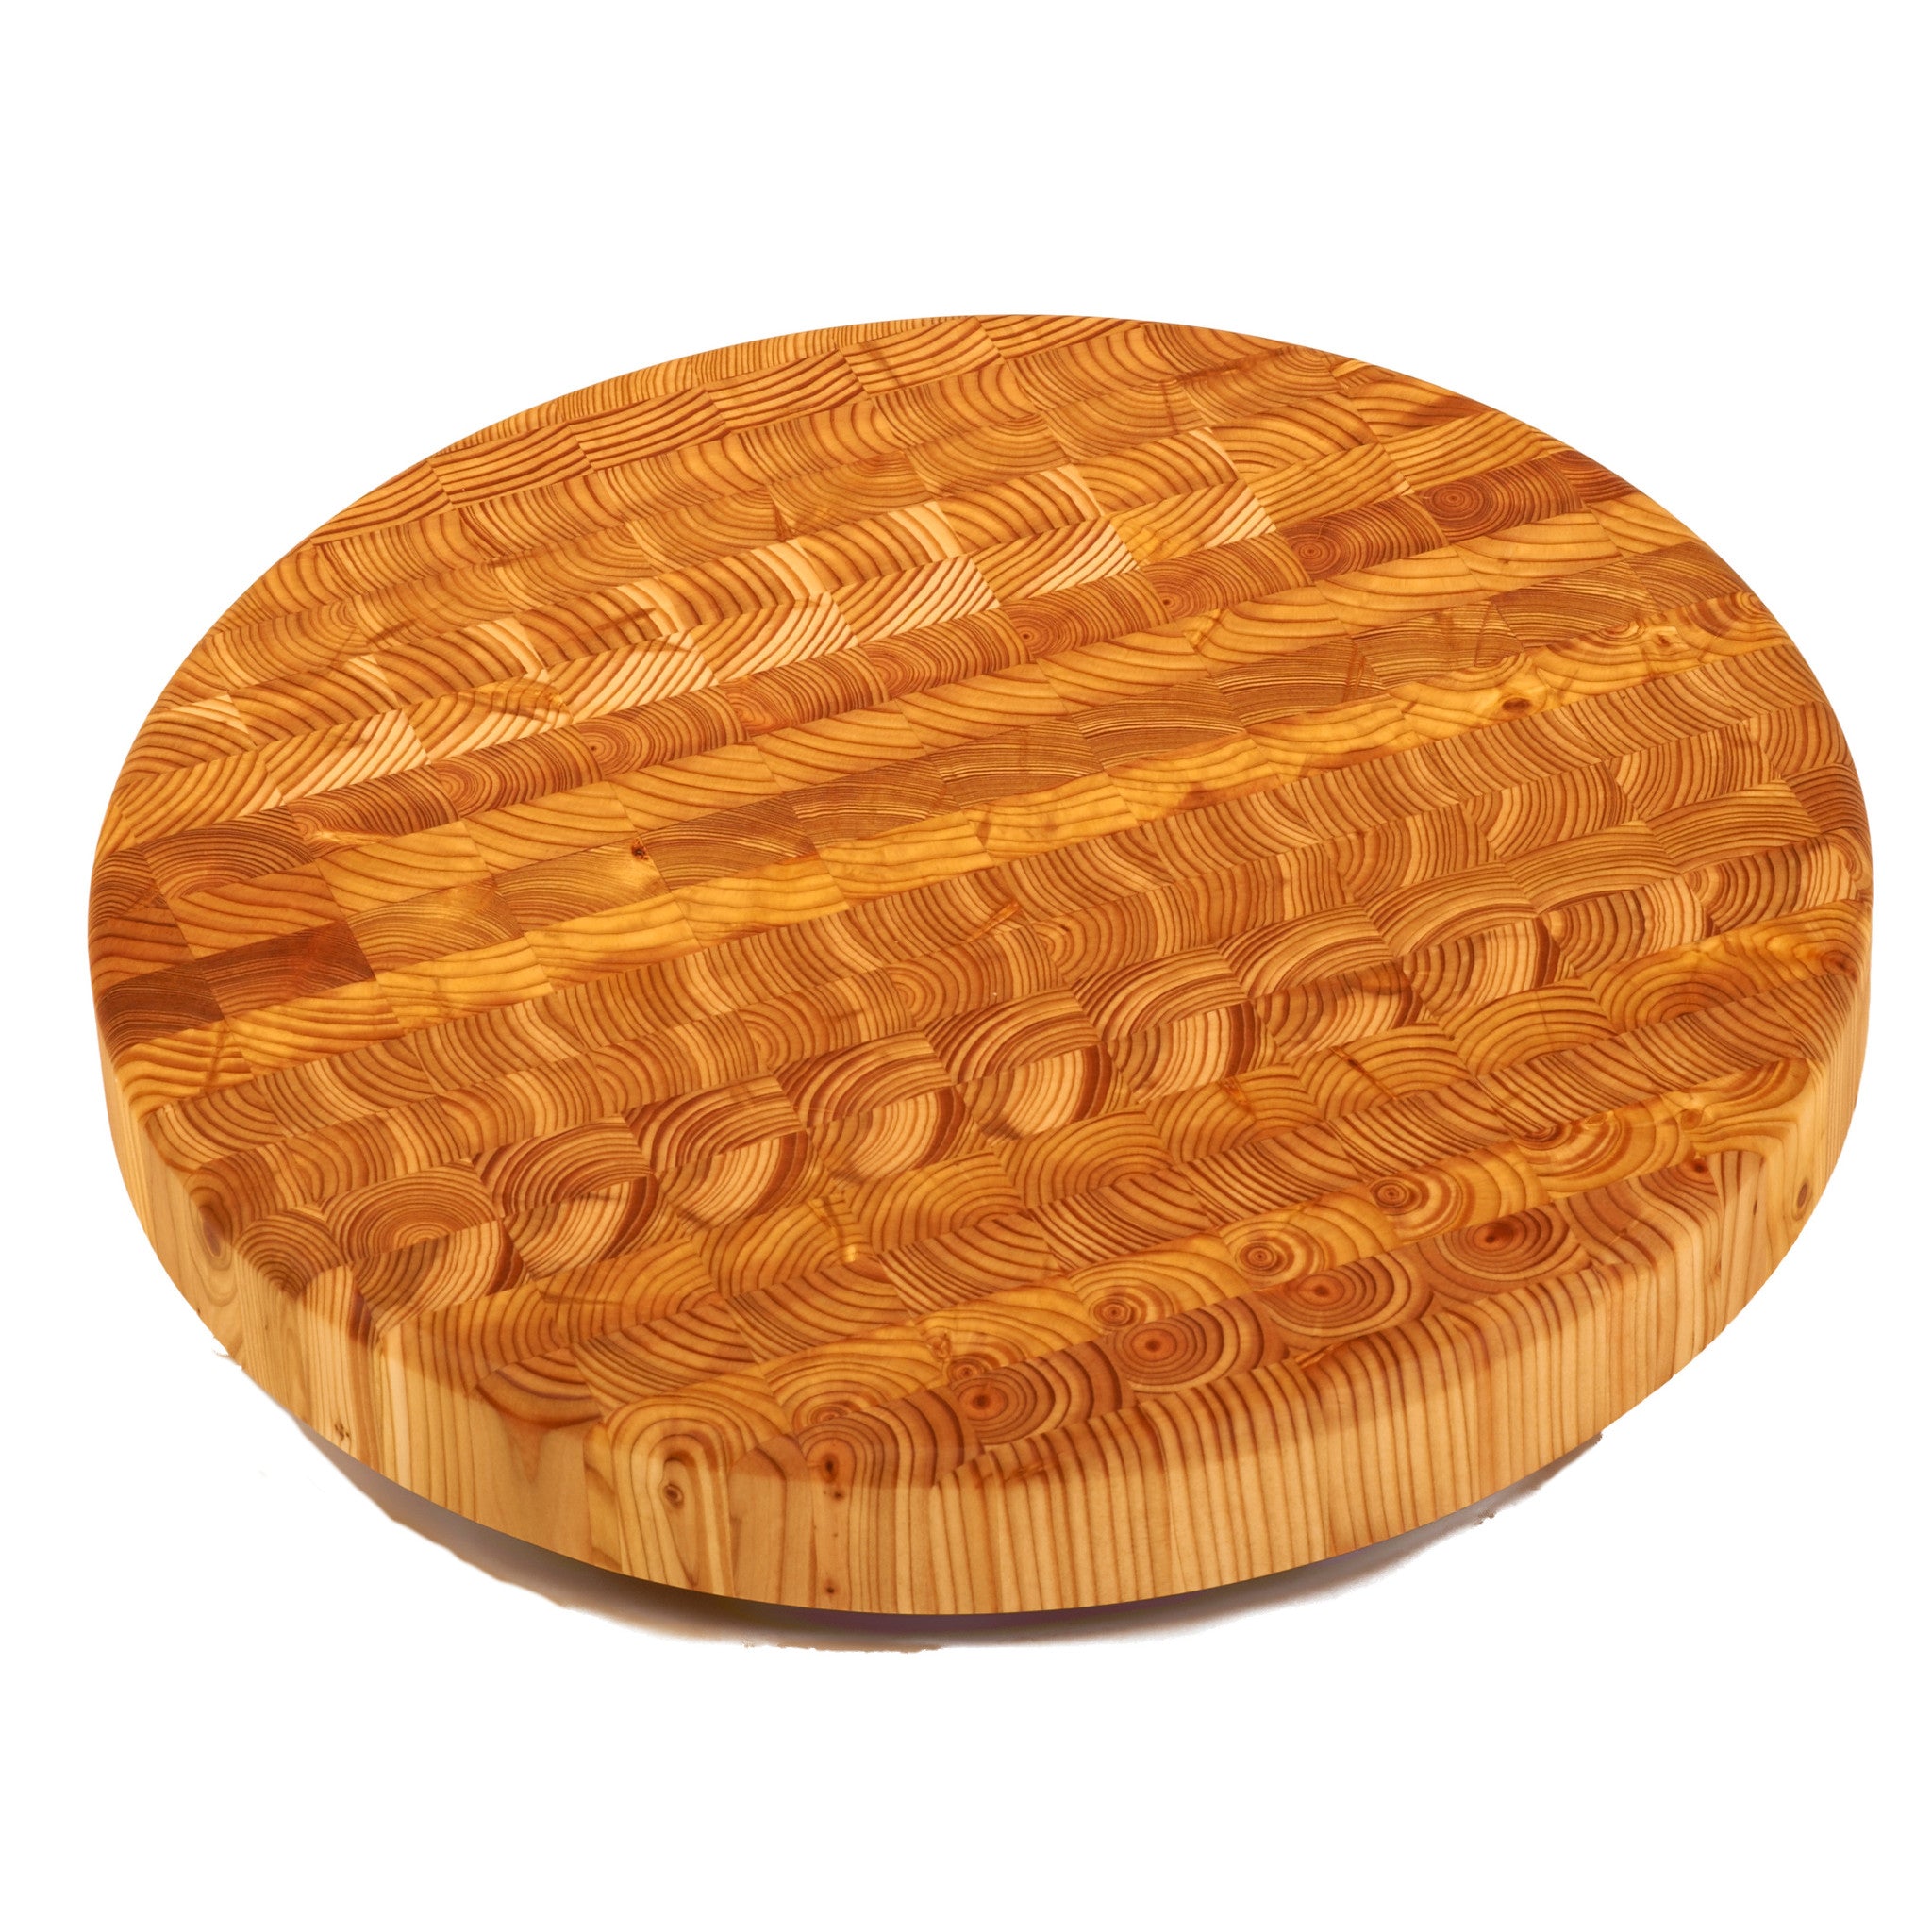 Cheungs Wood and Metal Cheese Grater on Cutting Board Decor